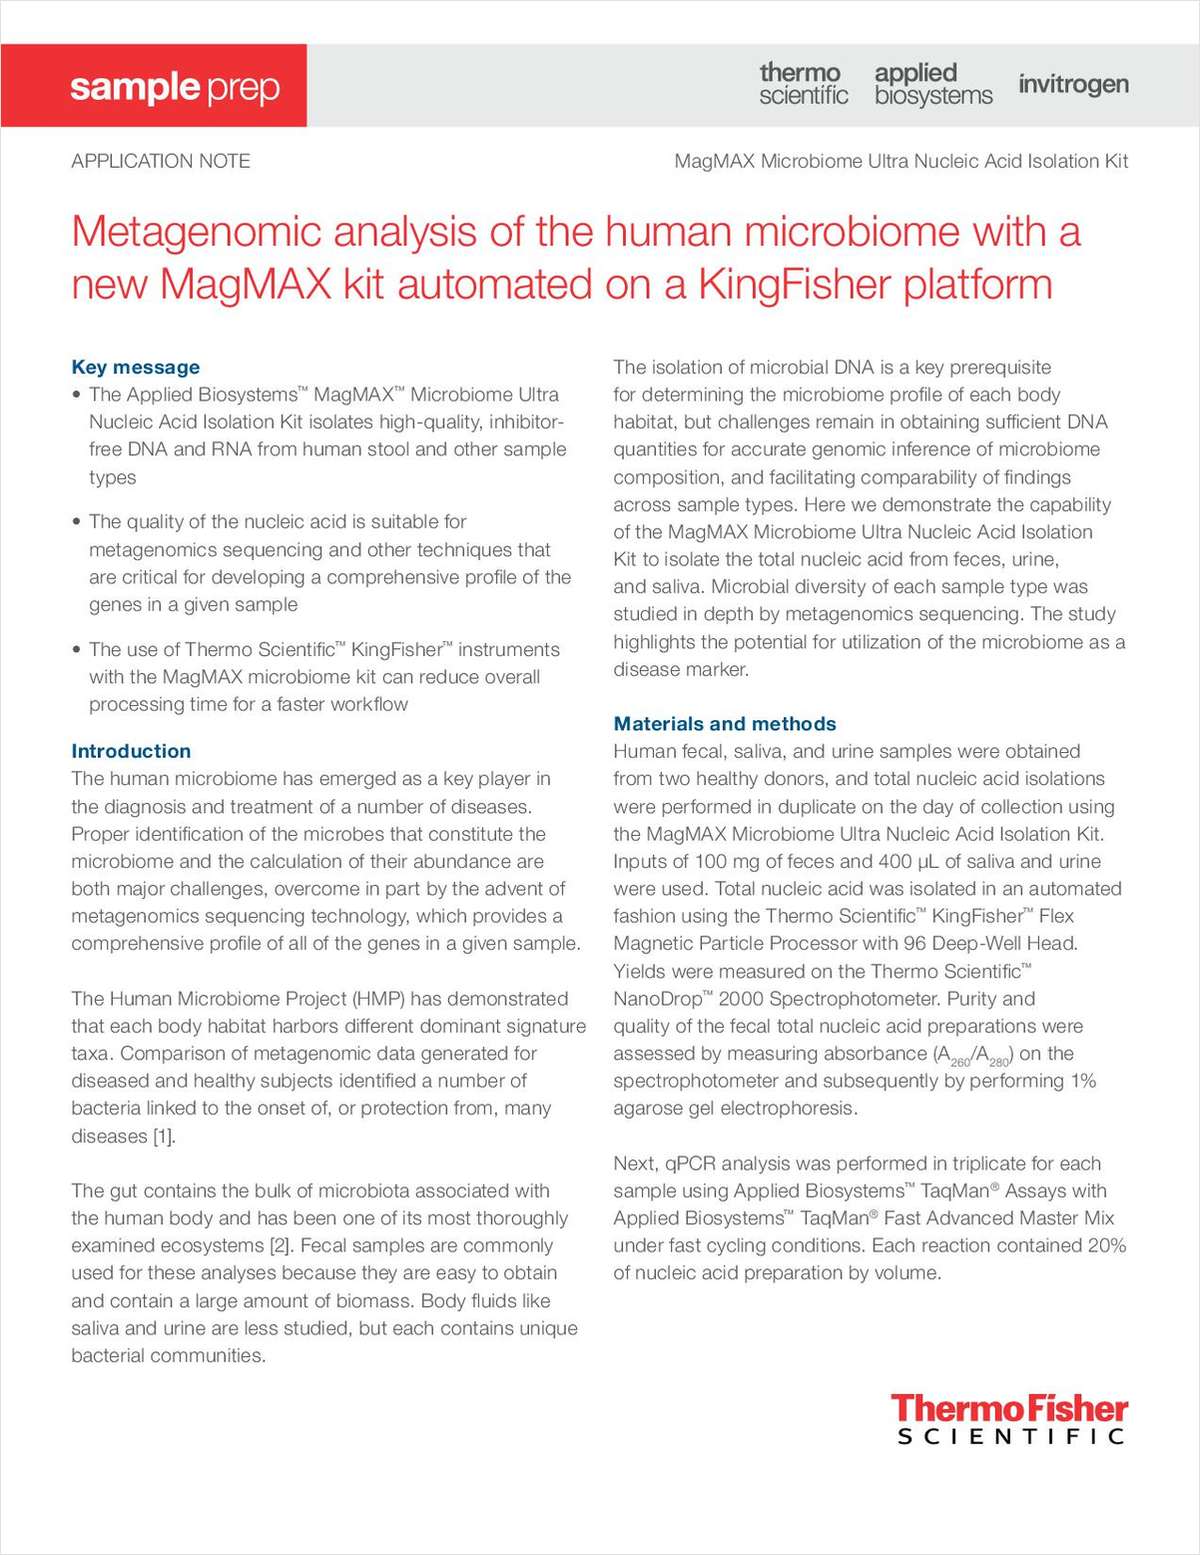 Metagenomic Analysis of the Human Microbiome With a New MagMax Kit Automated on a KingFisher Platform